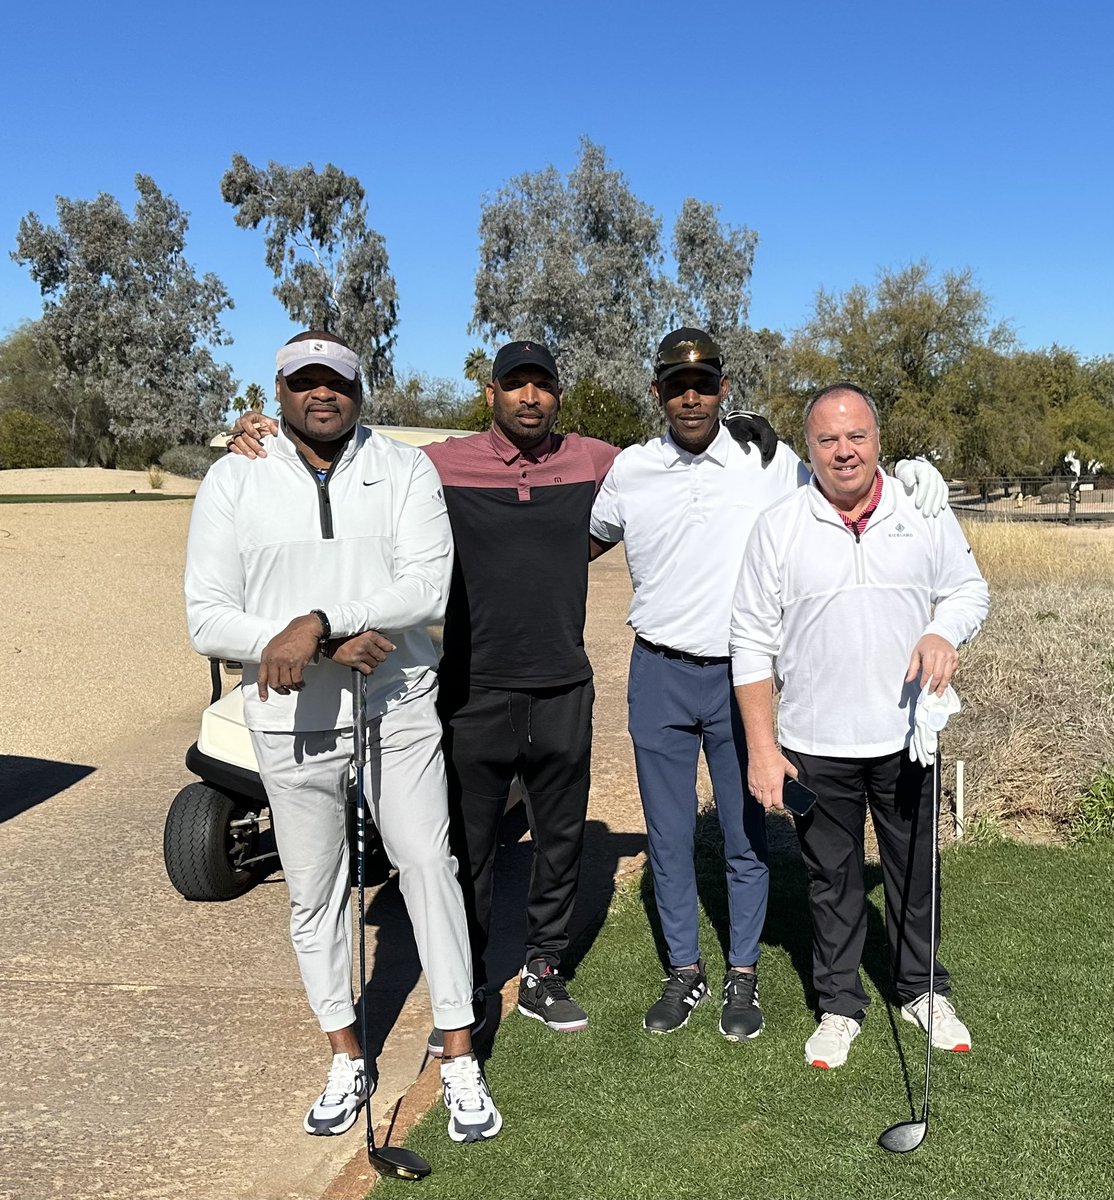 Great time swinging the clubs with these knuckleheads, you won’t get the peace and quiet/integrity of the sport but you’ll have a damn good time lol…@NeilSmith_NFL , Patrick Mahomes Senior and Larry Sinks! #GoChiefs🏈